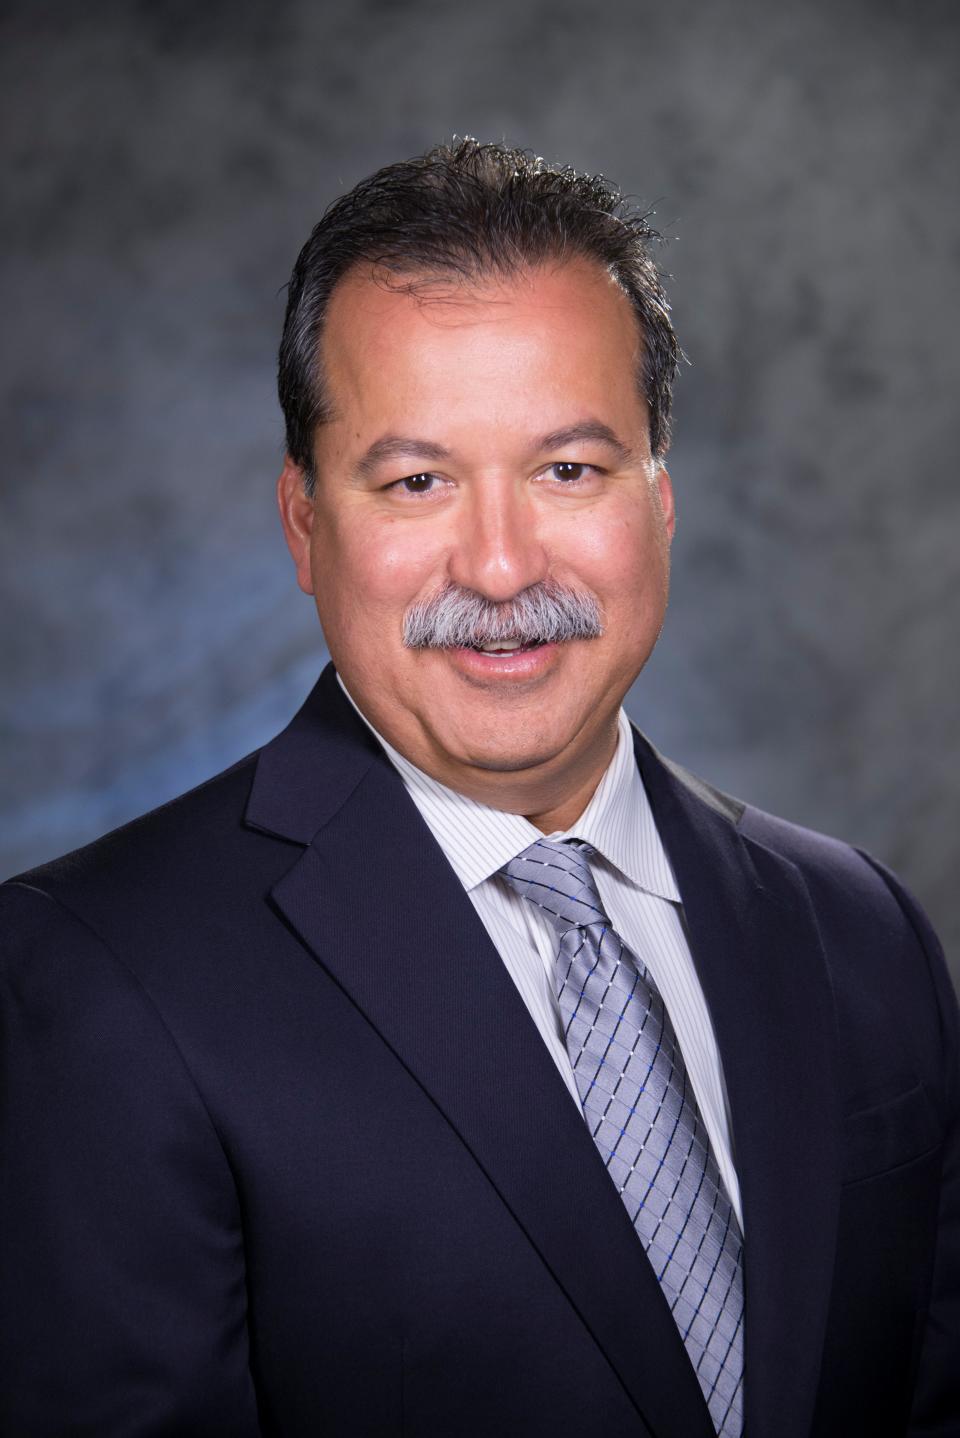 Dominic Dominguez, senior vice president of South Texas health ministries and CEO of Christus Spohn Health System.